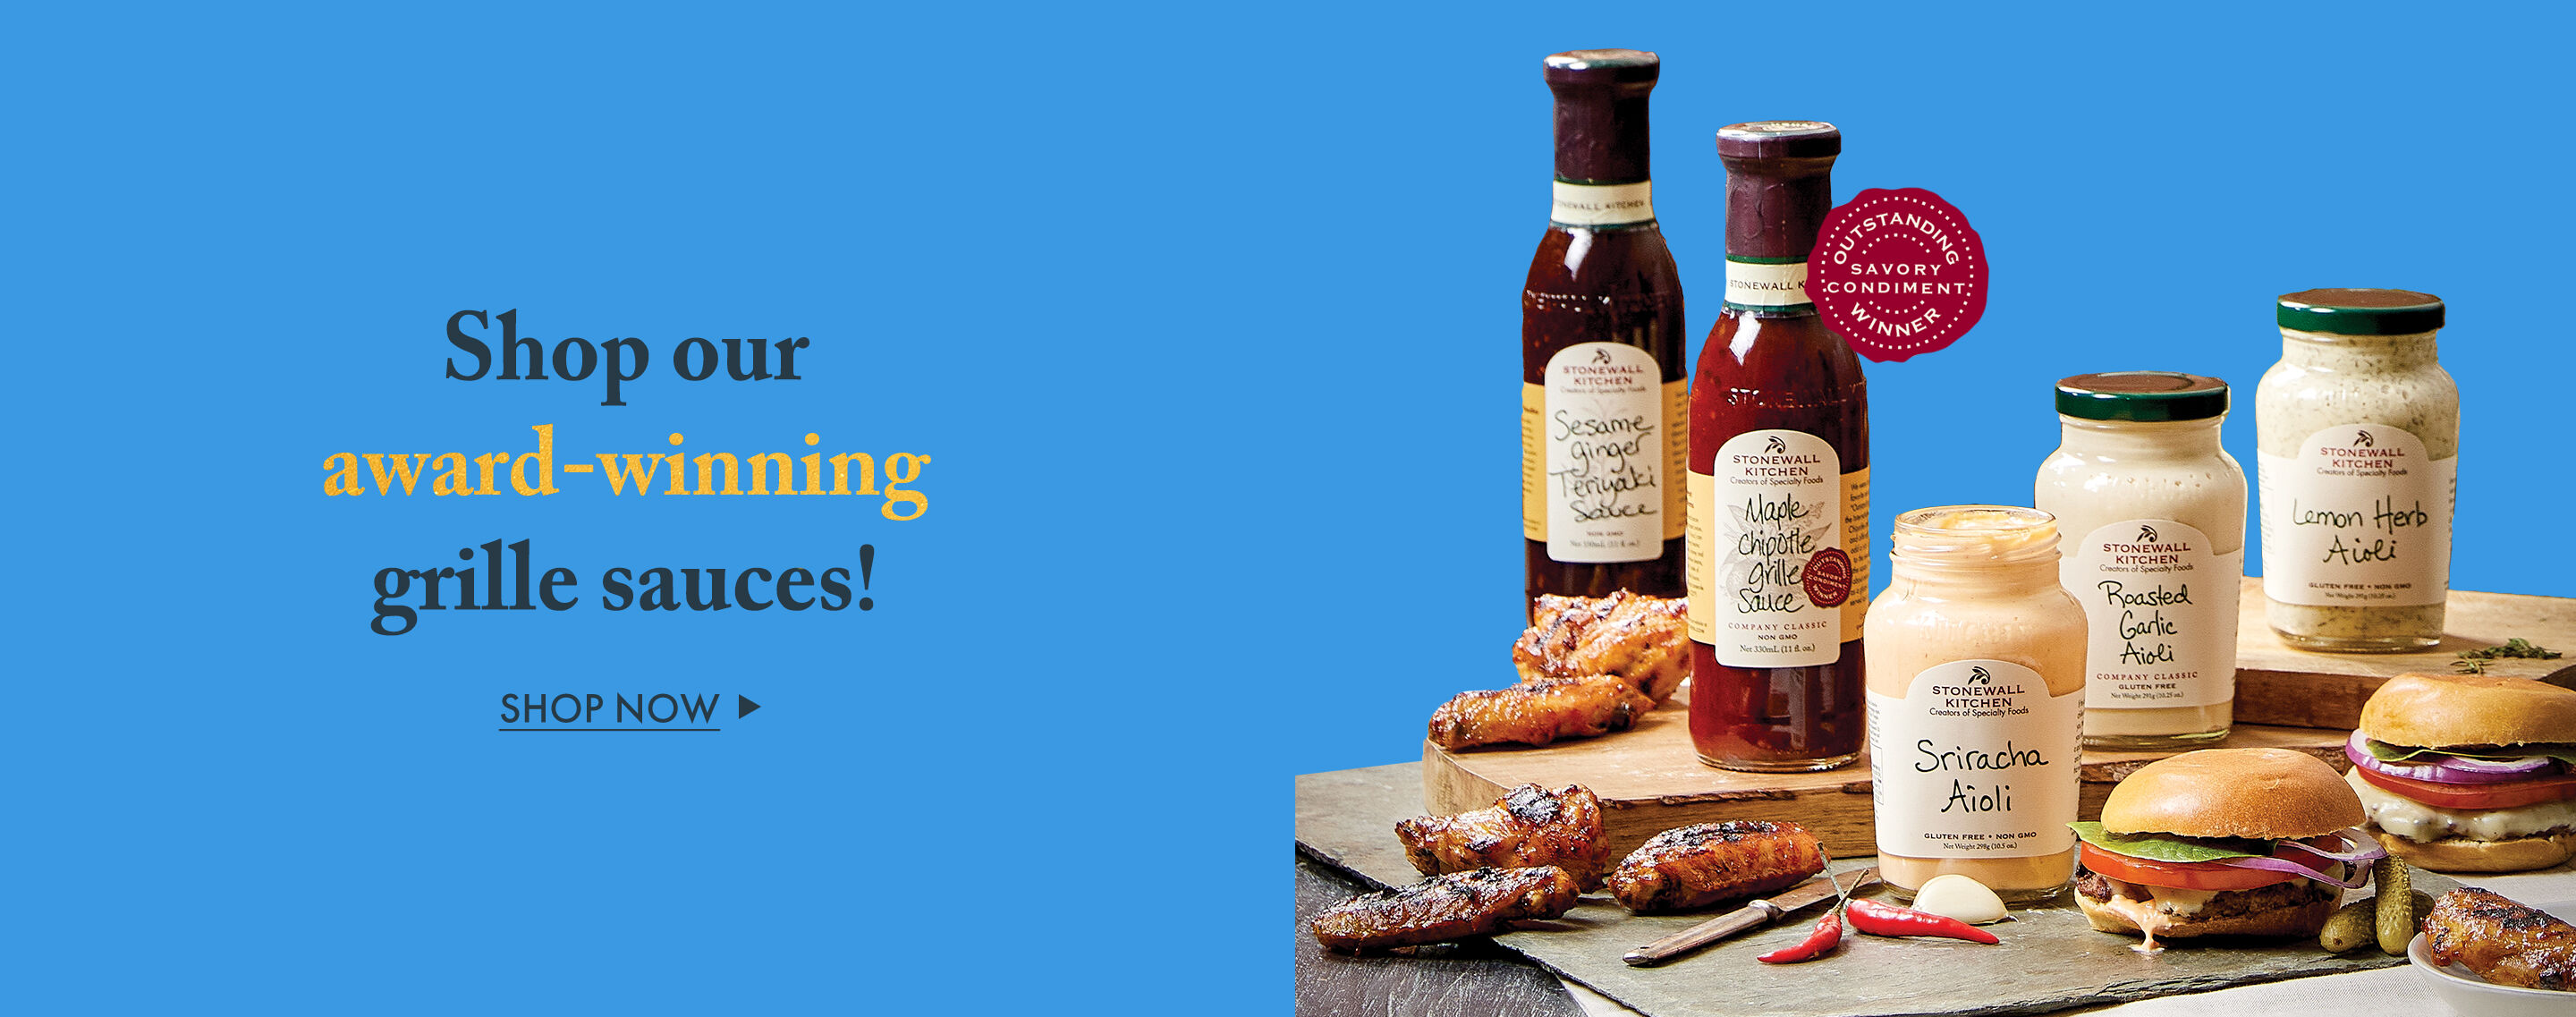 Shop our award-winning grille sauces! - Shop Now